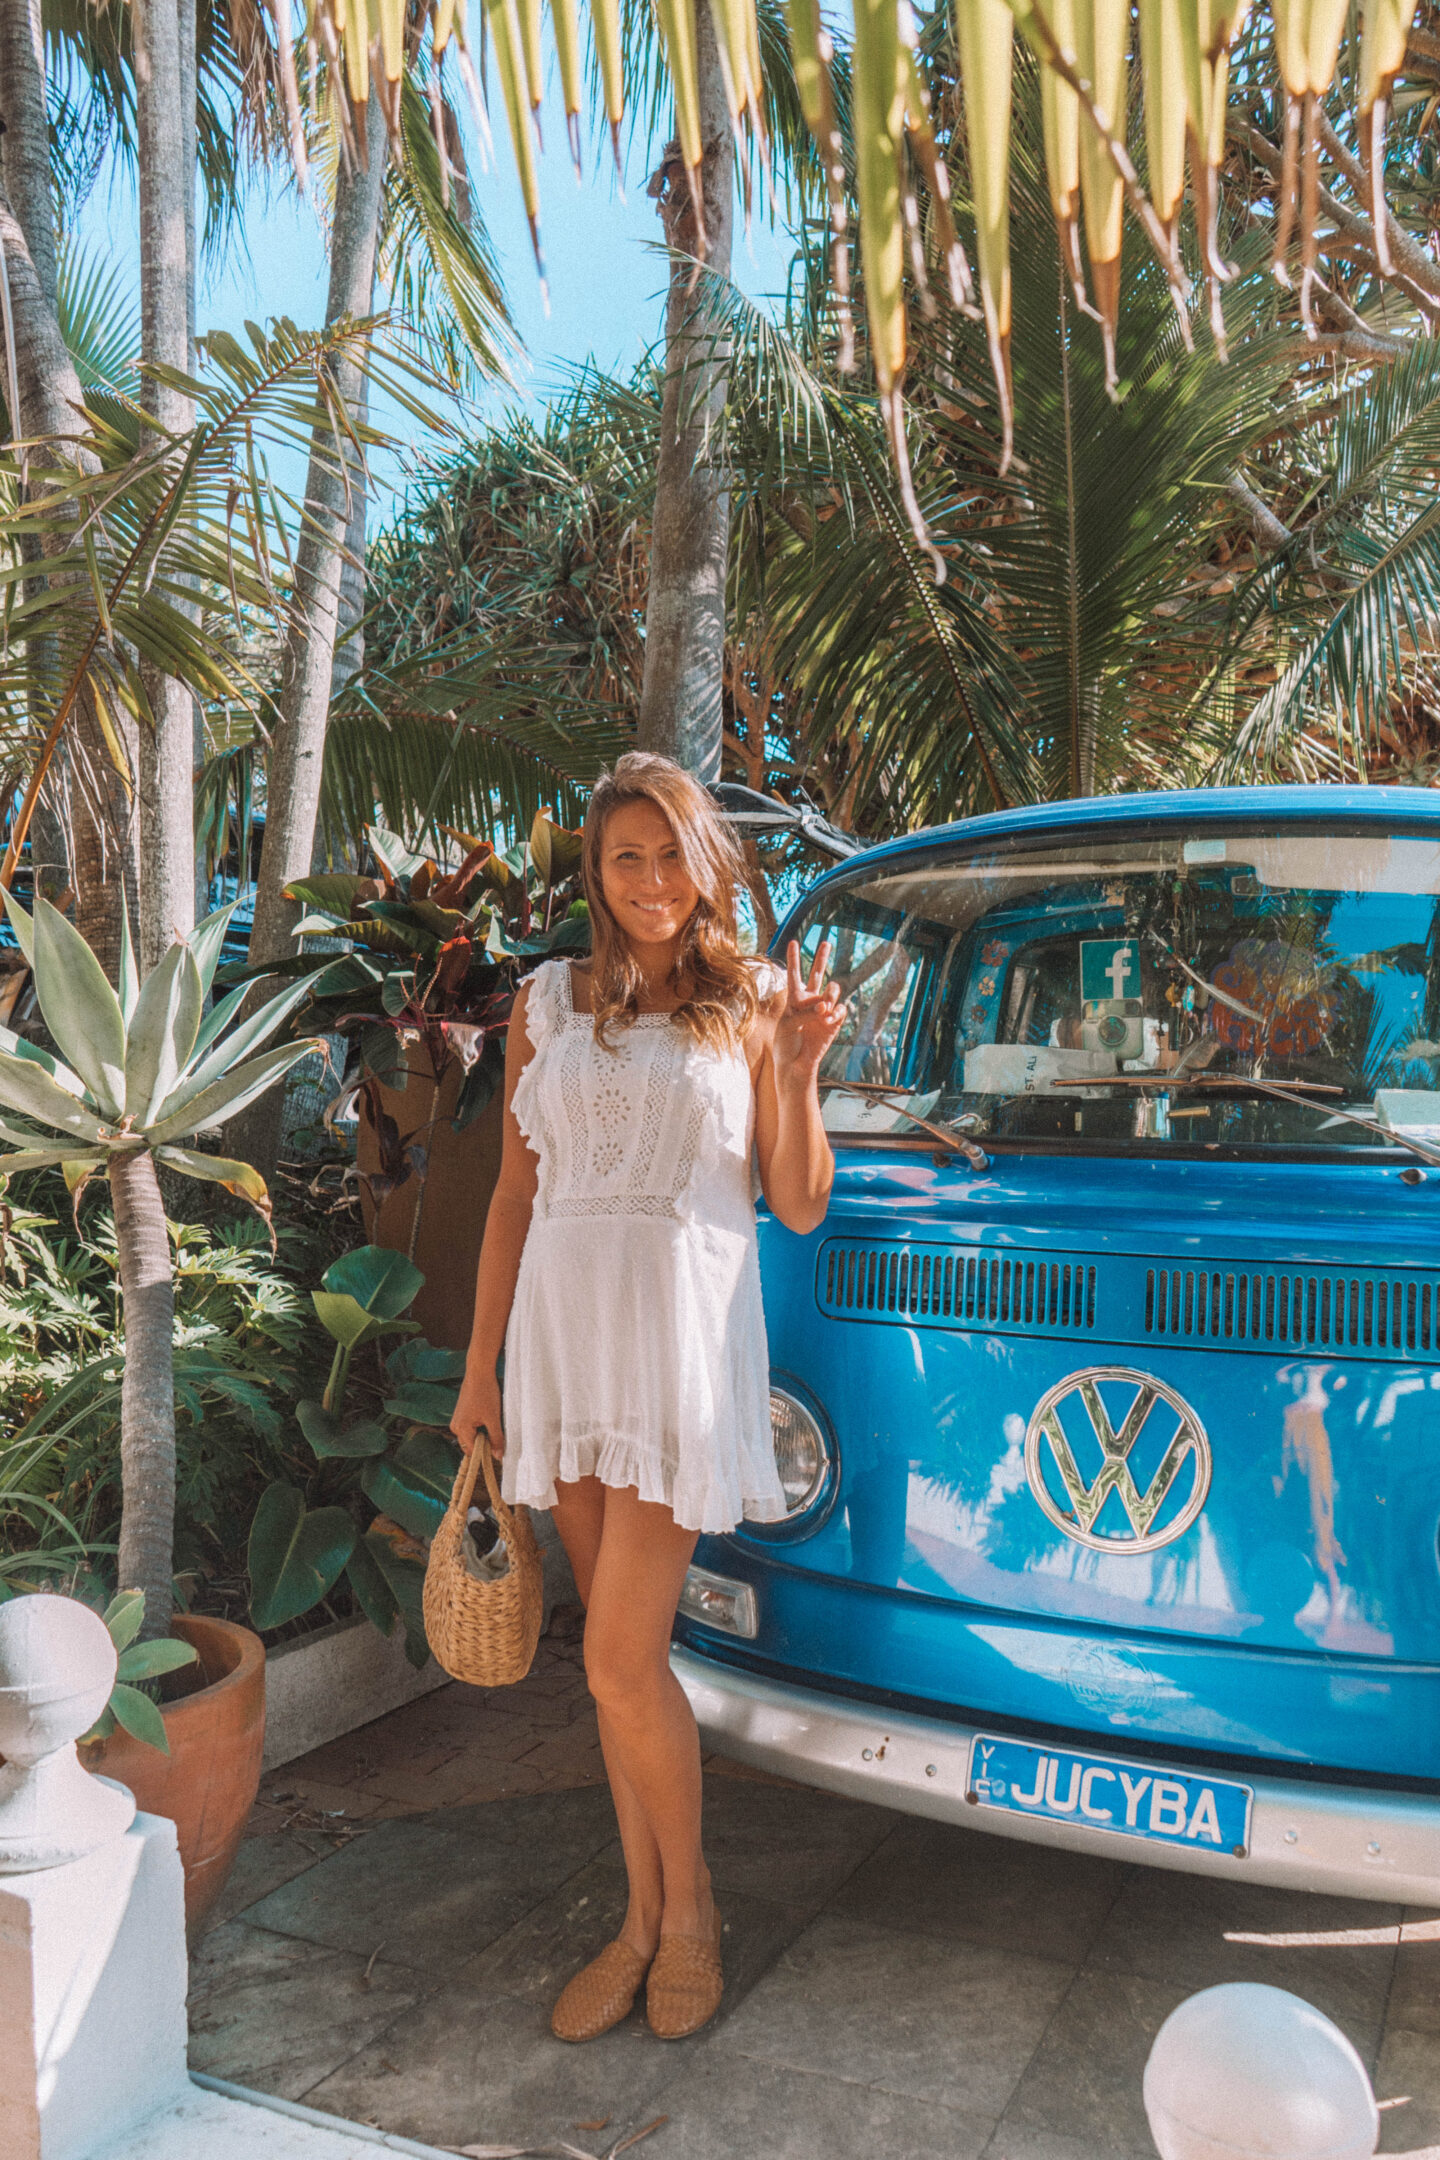 A girl in a white dress puts up the peace sign in front of a blue Volkswagon van in Byron Bay, Australia